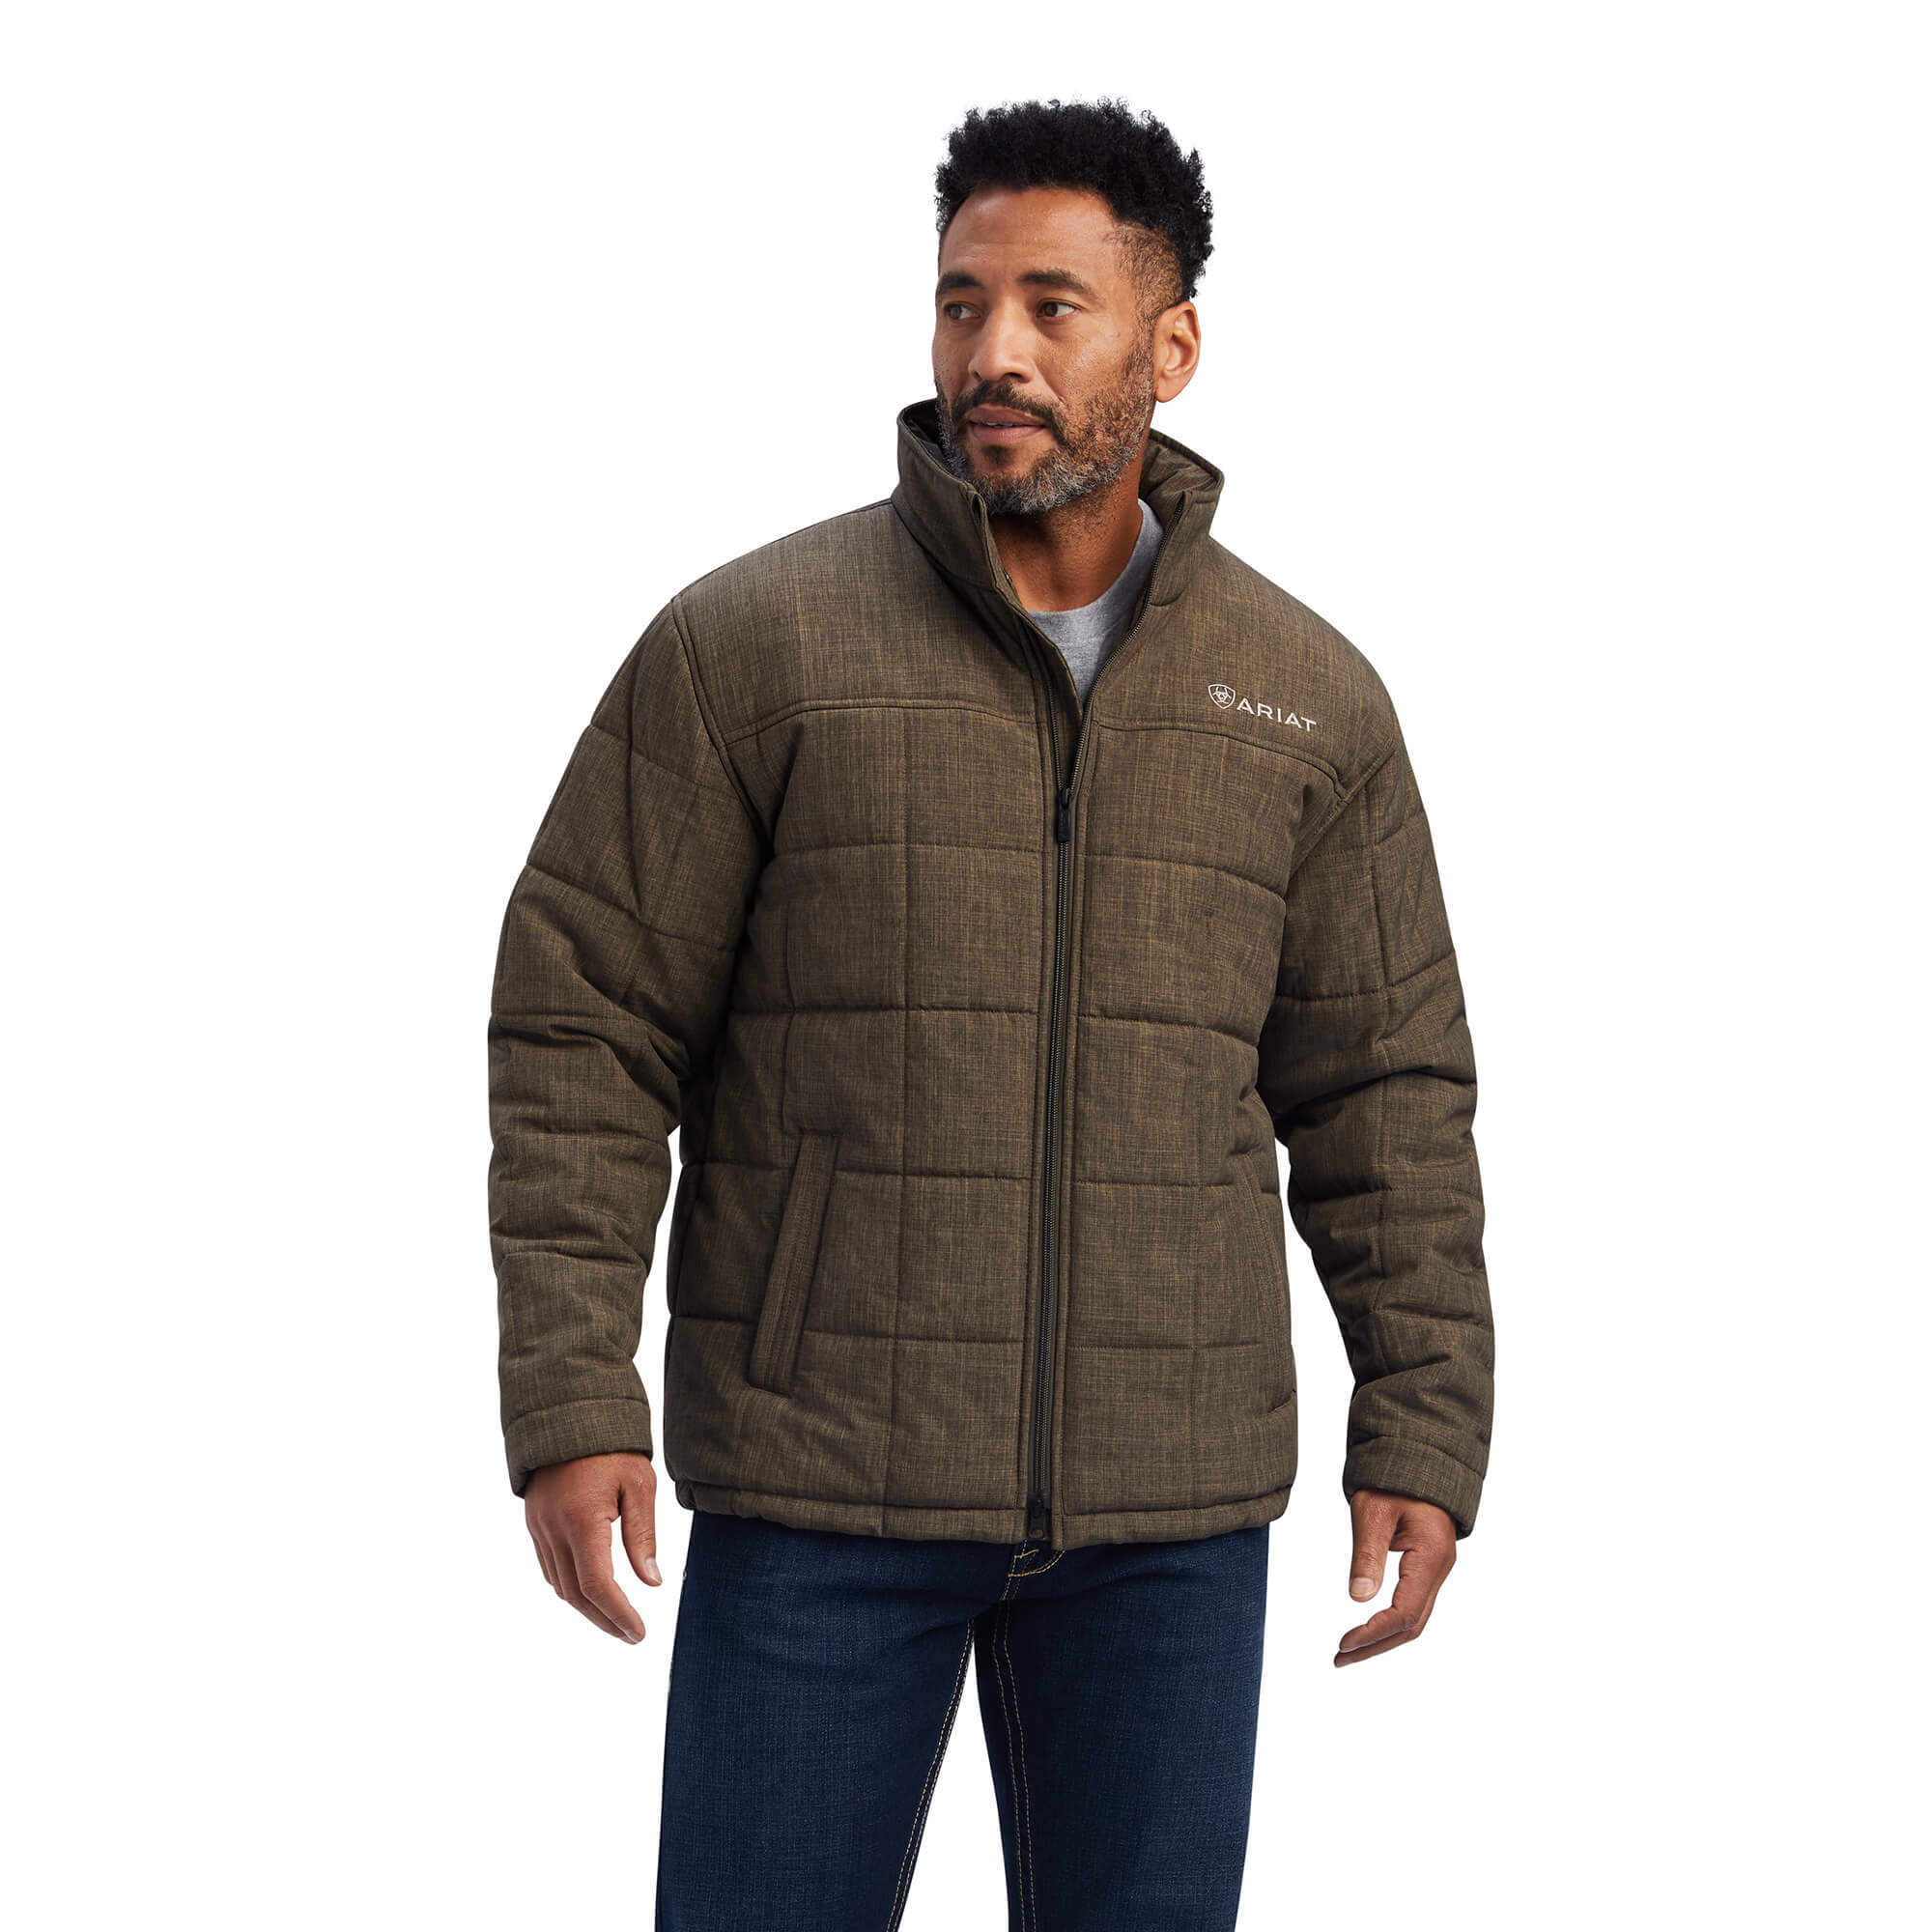 Ariat Crius Insulated Concealed Carry Jacket